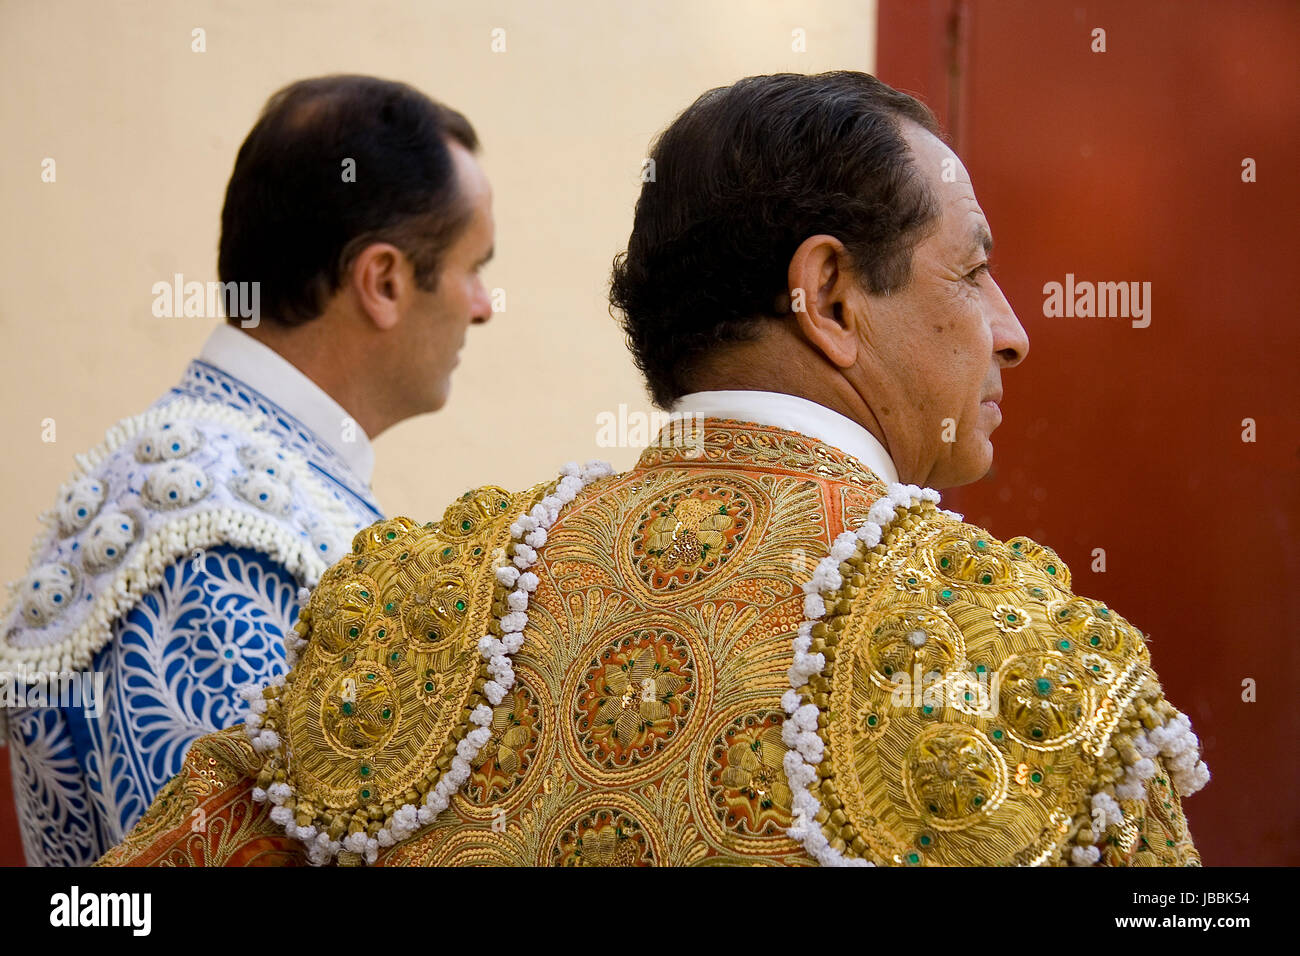 ALMENDRALEJO, SPAIN, AUGUST 15: Two lancers waiting before begin the bullfight, on August 15, 2009 in Almendralejo, Spain Stock Photo